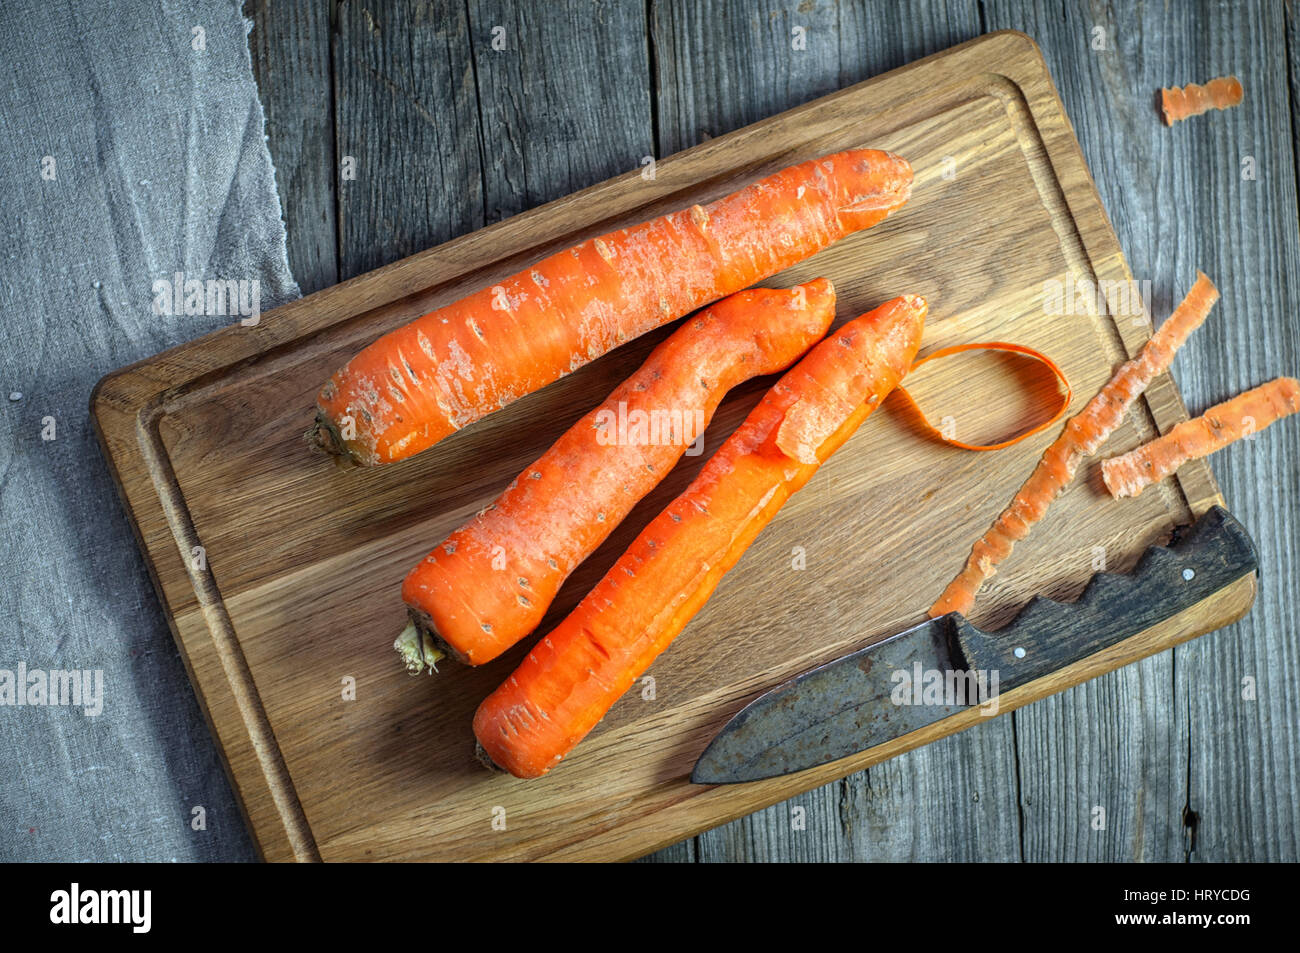 whole carrots on a kitchen wooden board, top view Stock Photo